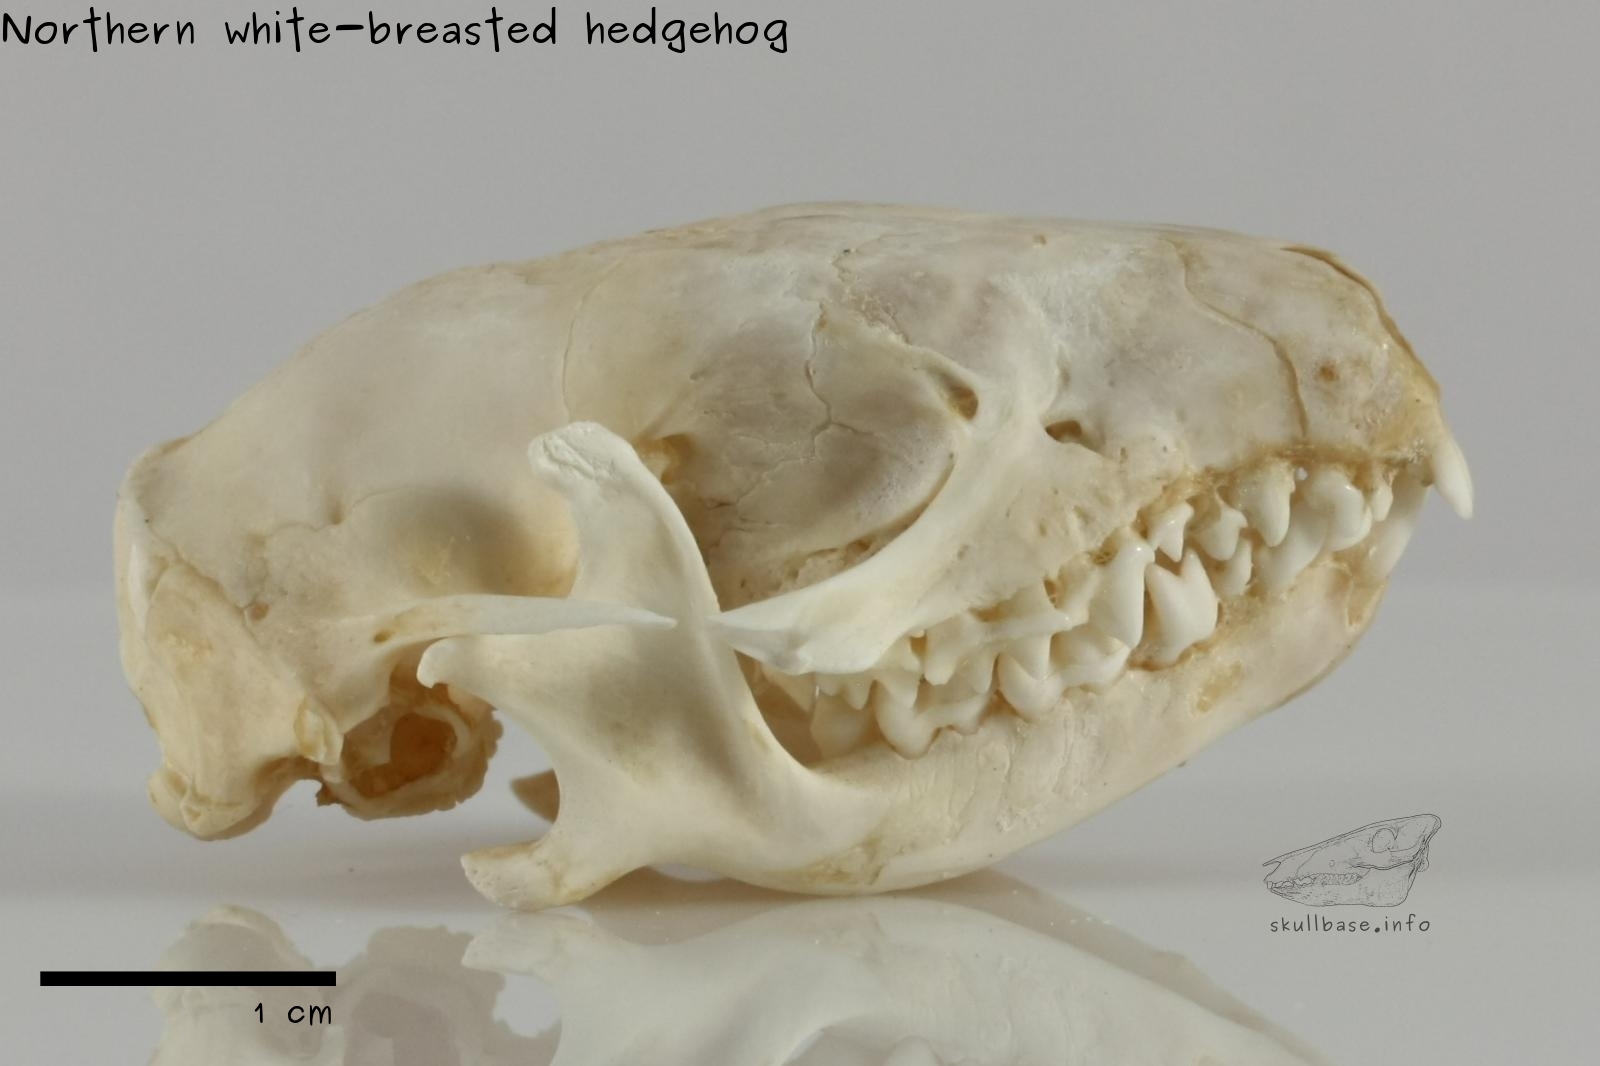 Northern white-breasted hedgehog (Erinaceus roumanicus) skull lateral view